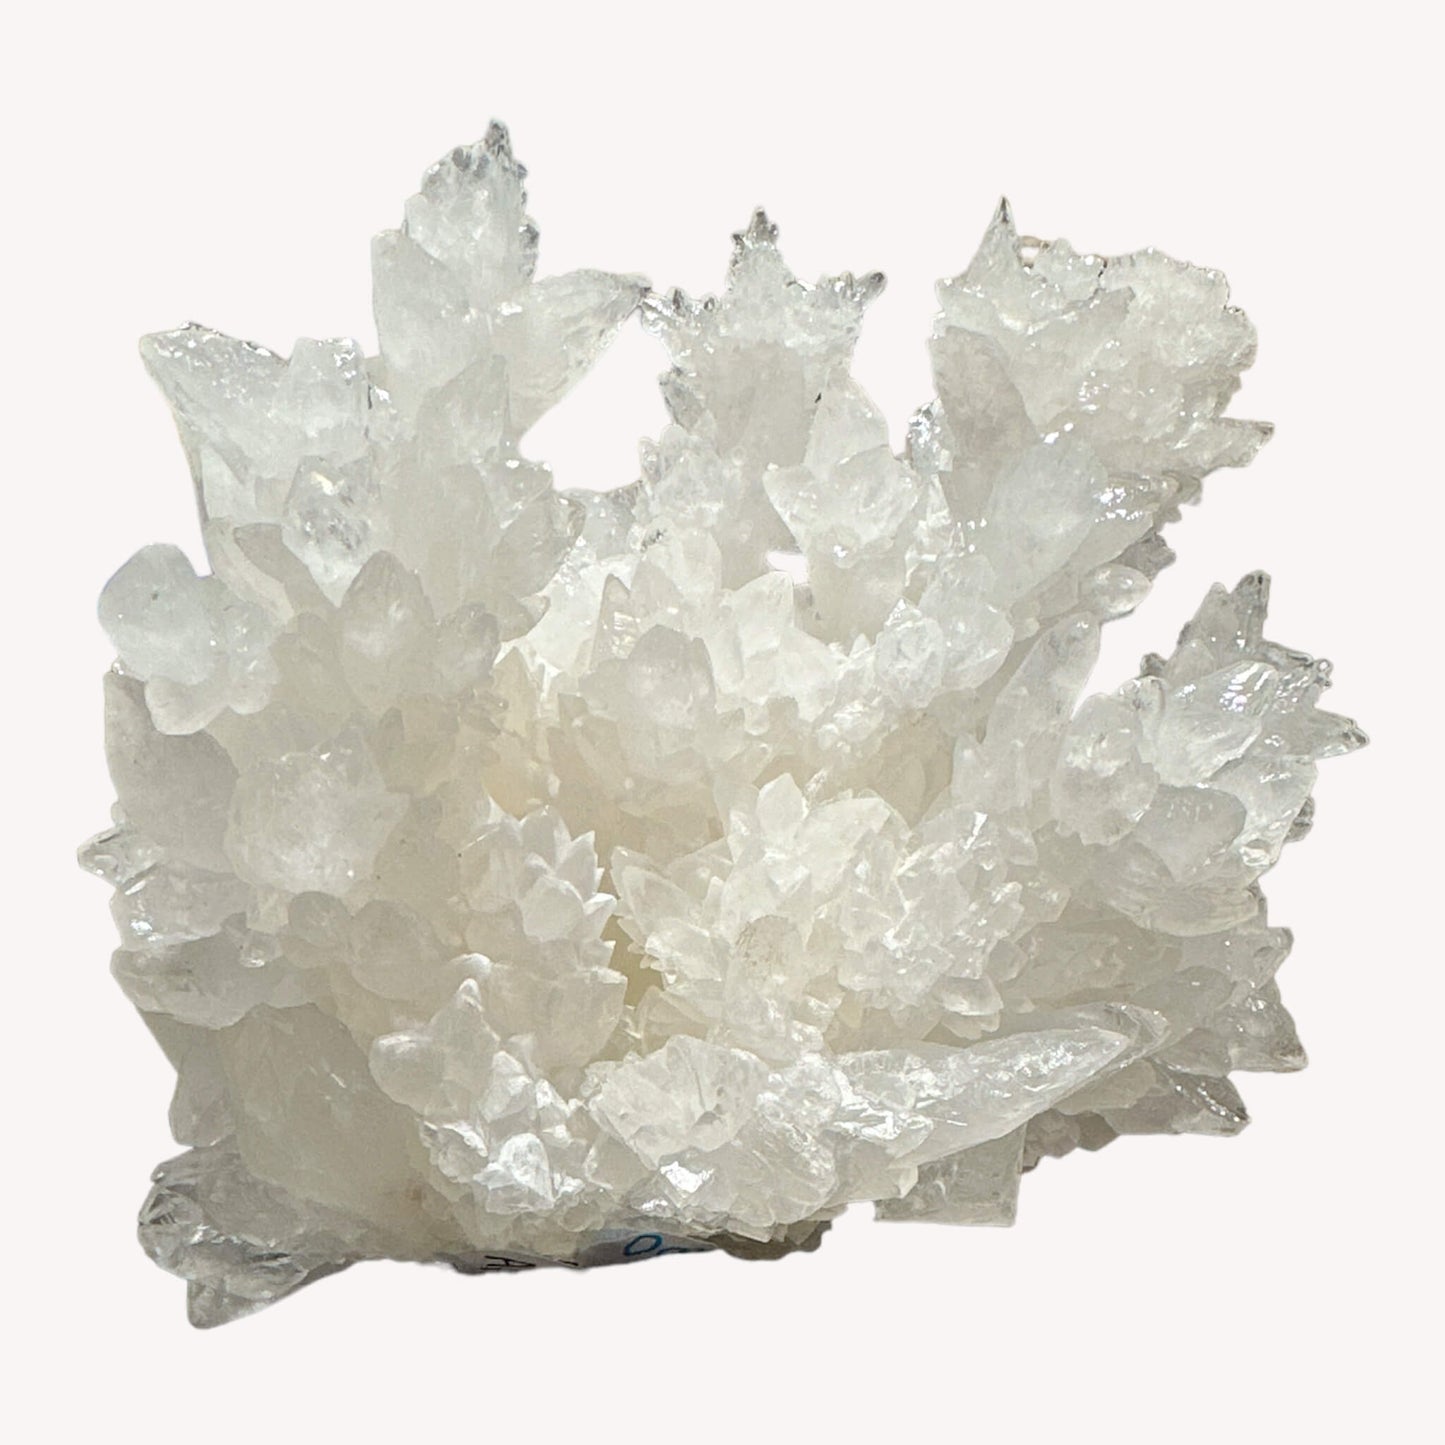 Front view of the magnificient White Aragonite crystal cluster